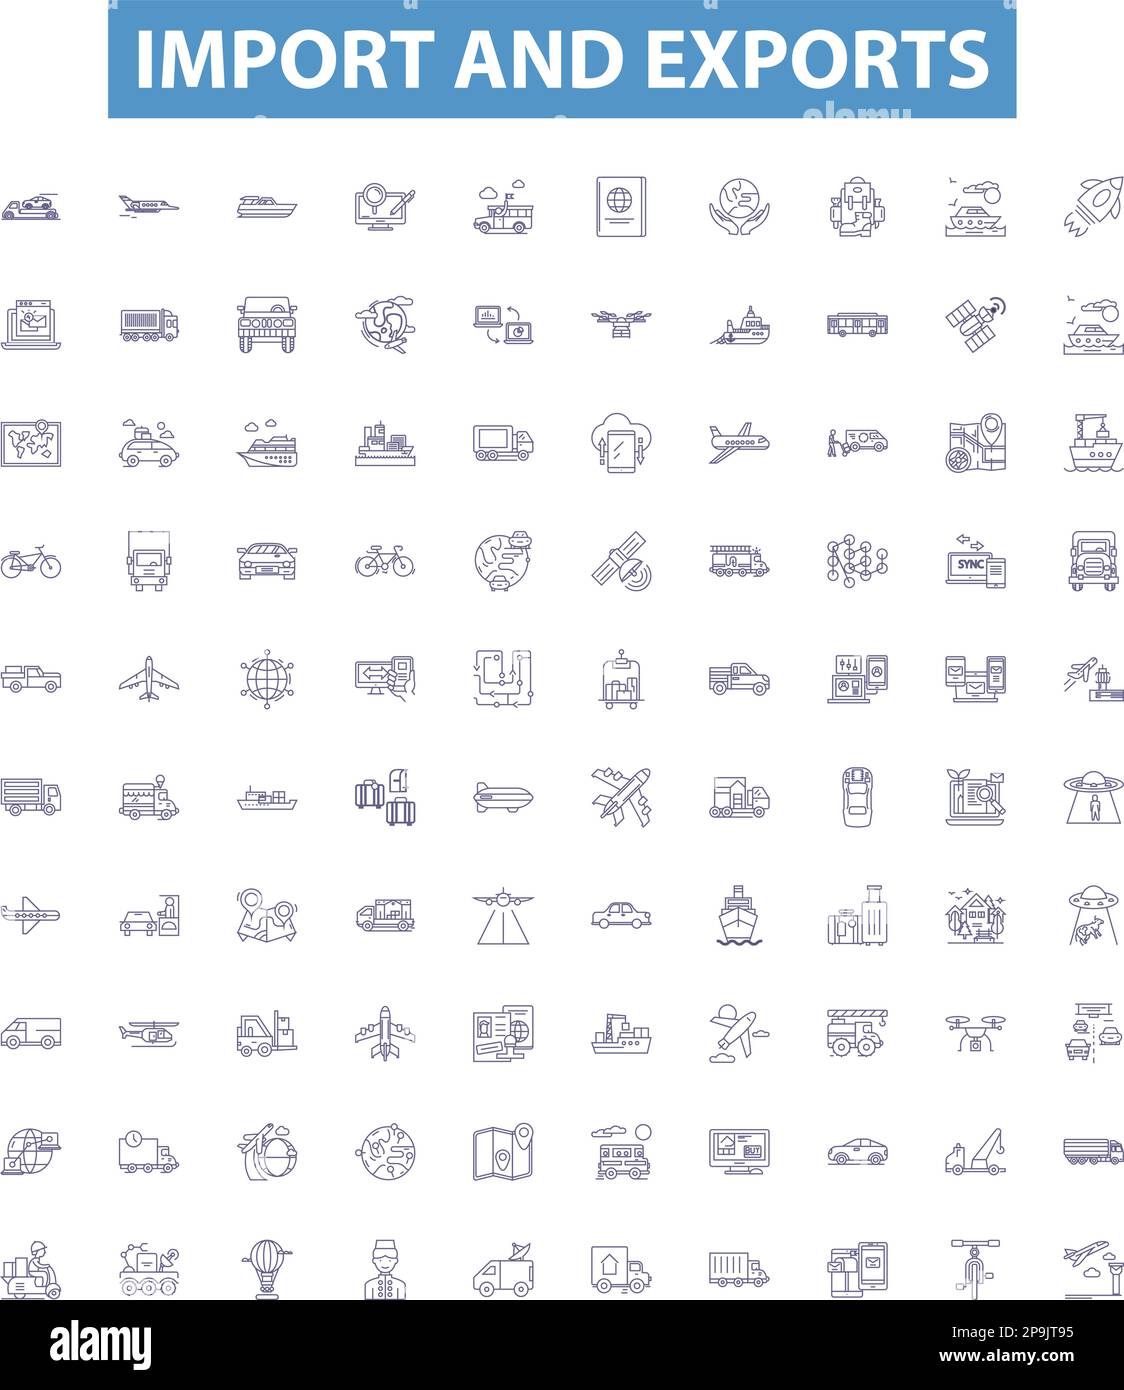 Import and exports line icons, signs set. import, export, trade, global, market, logistics, transportation, shipping, customs outline vector Stock Vector